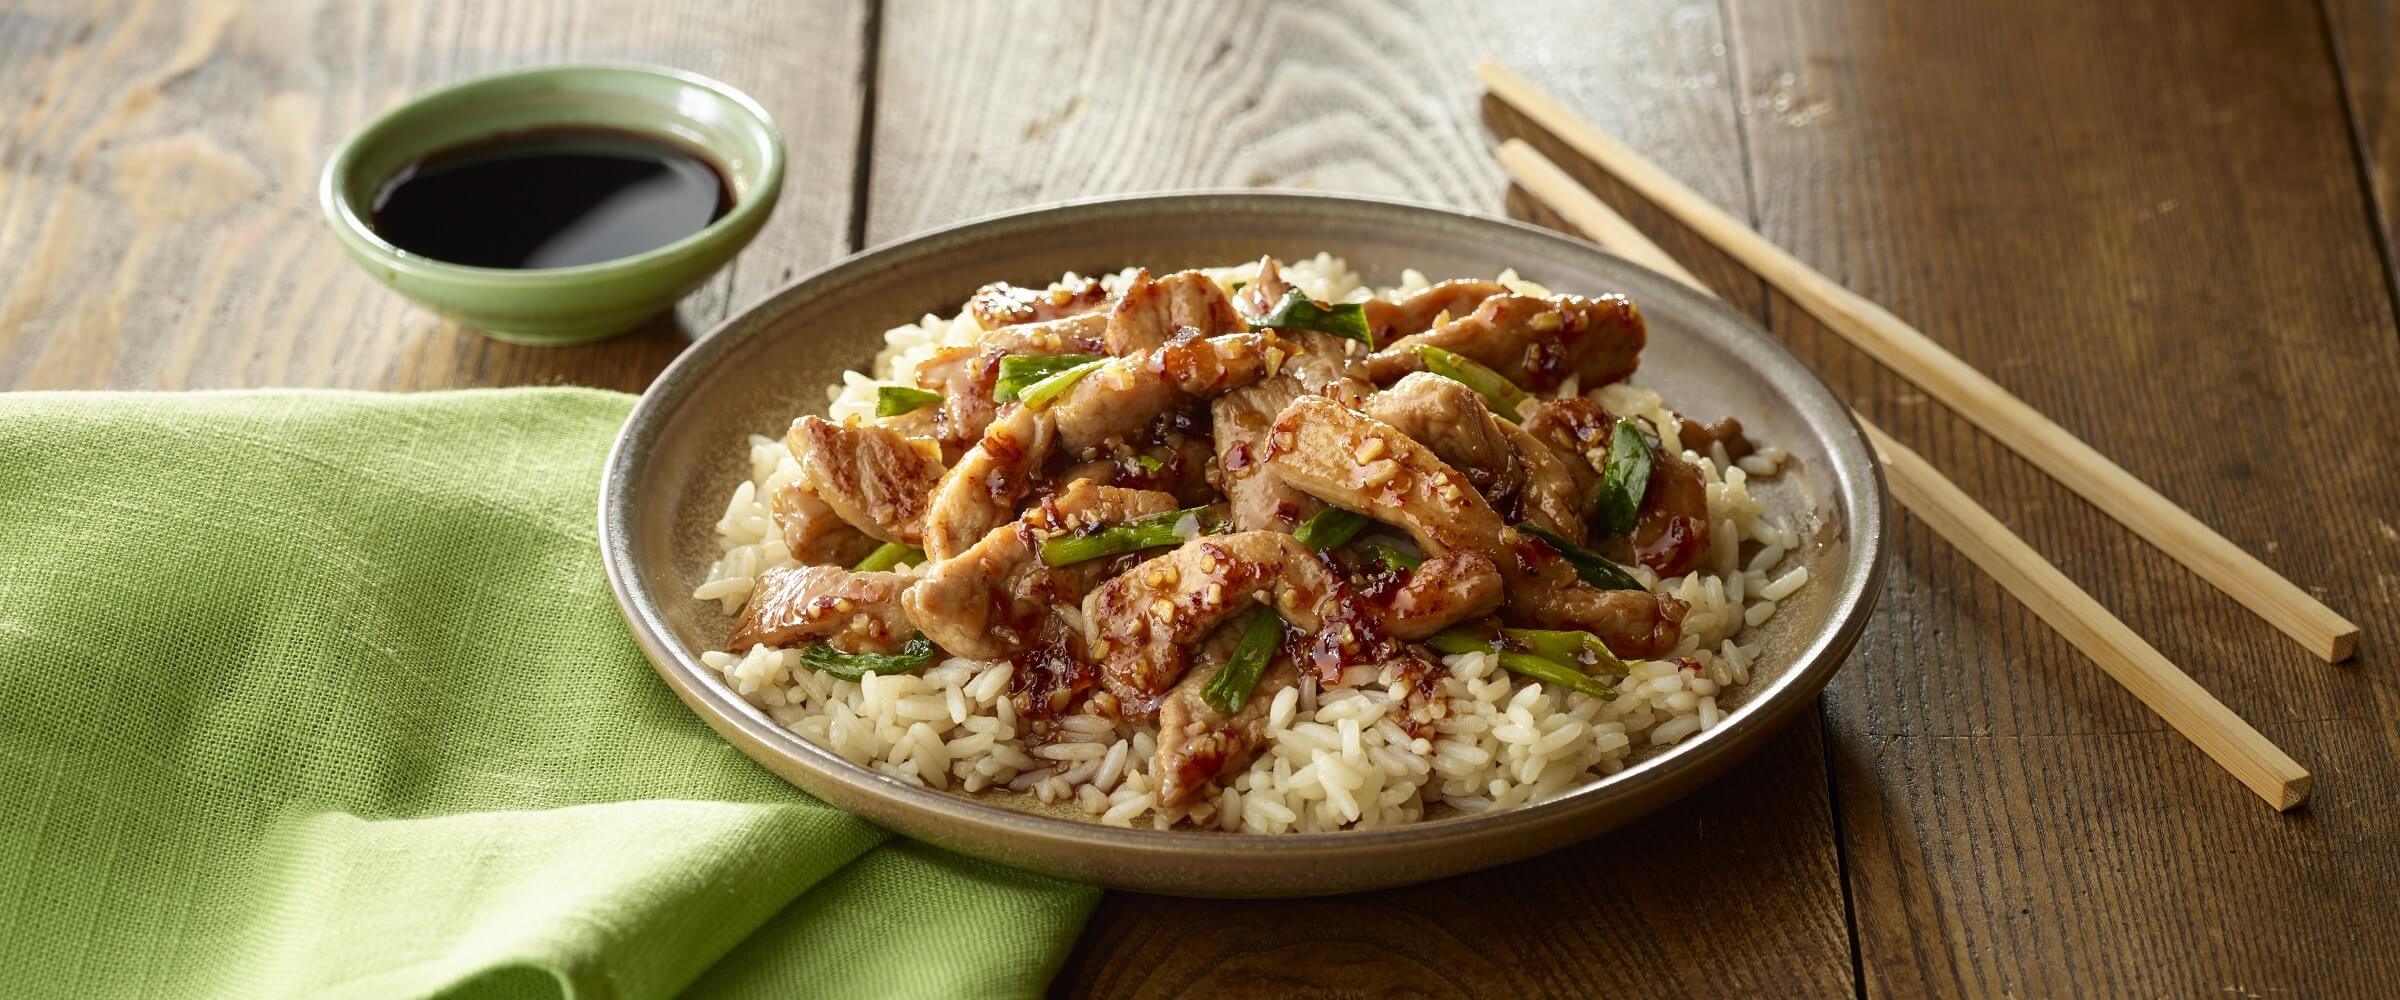 Garlic ginger glazed pork over rice in tan bowl with chopsticks and green napkin